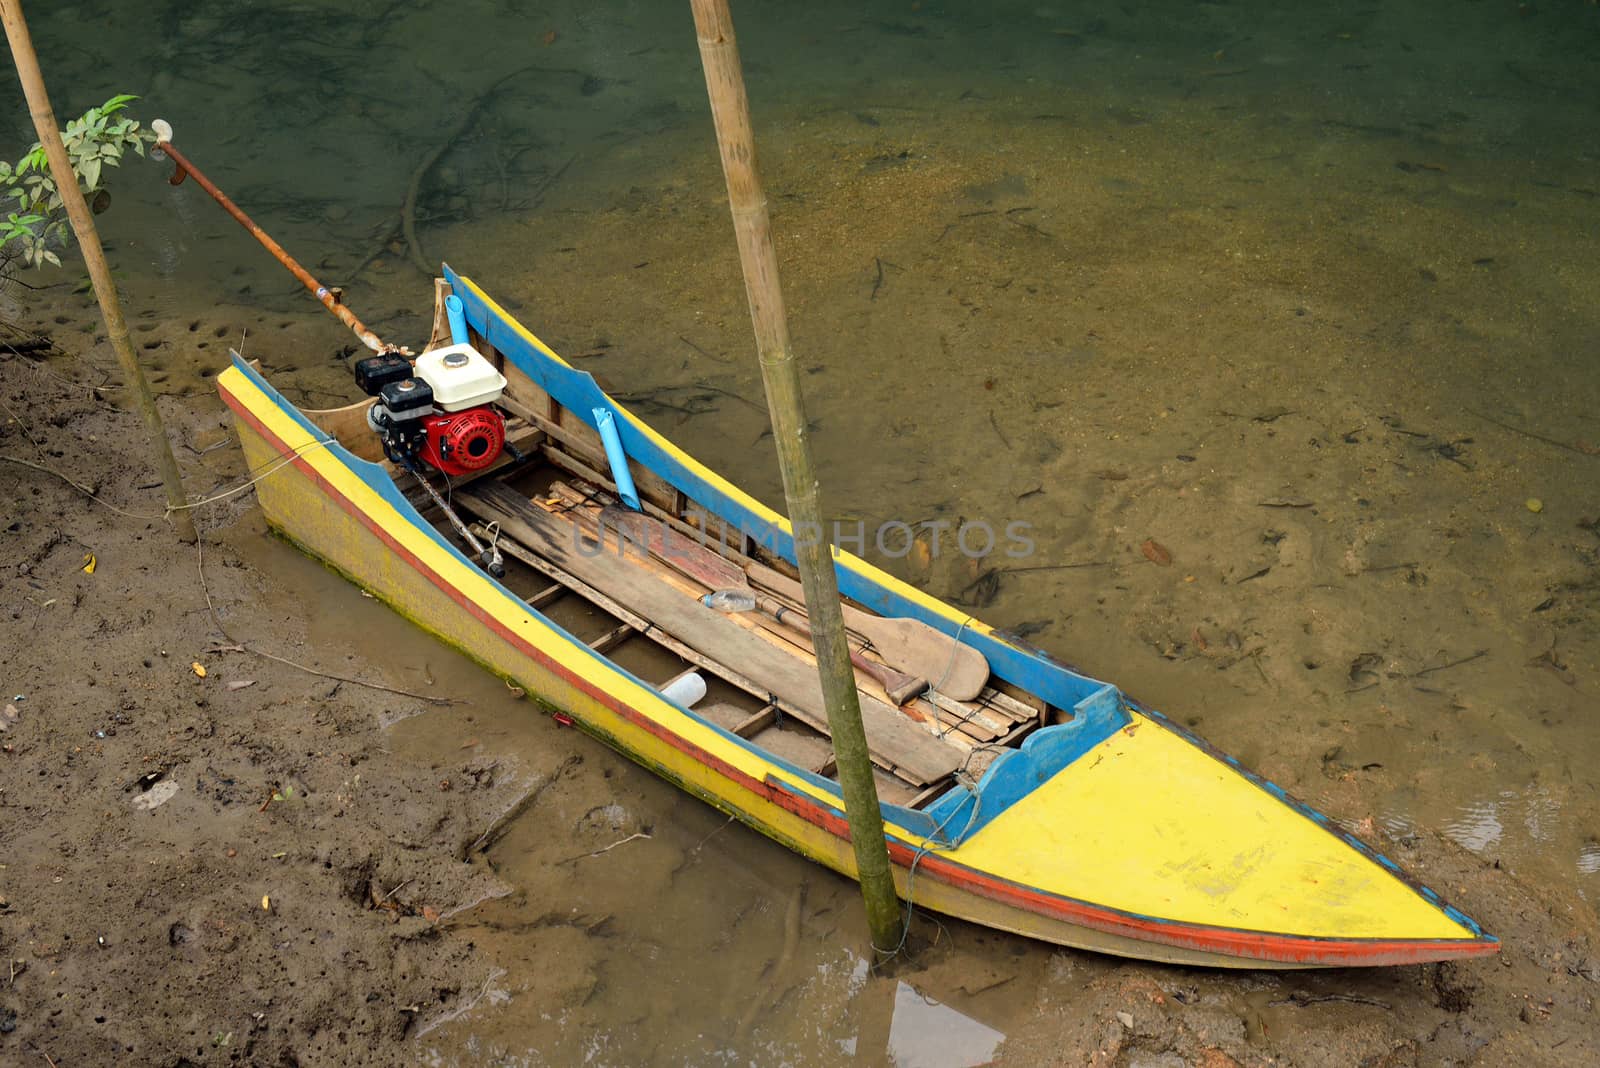 thetraditional boat in mangroves forest, Krabi, Thailand. by think4photop